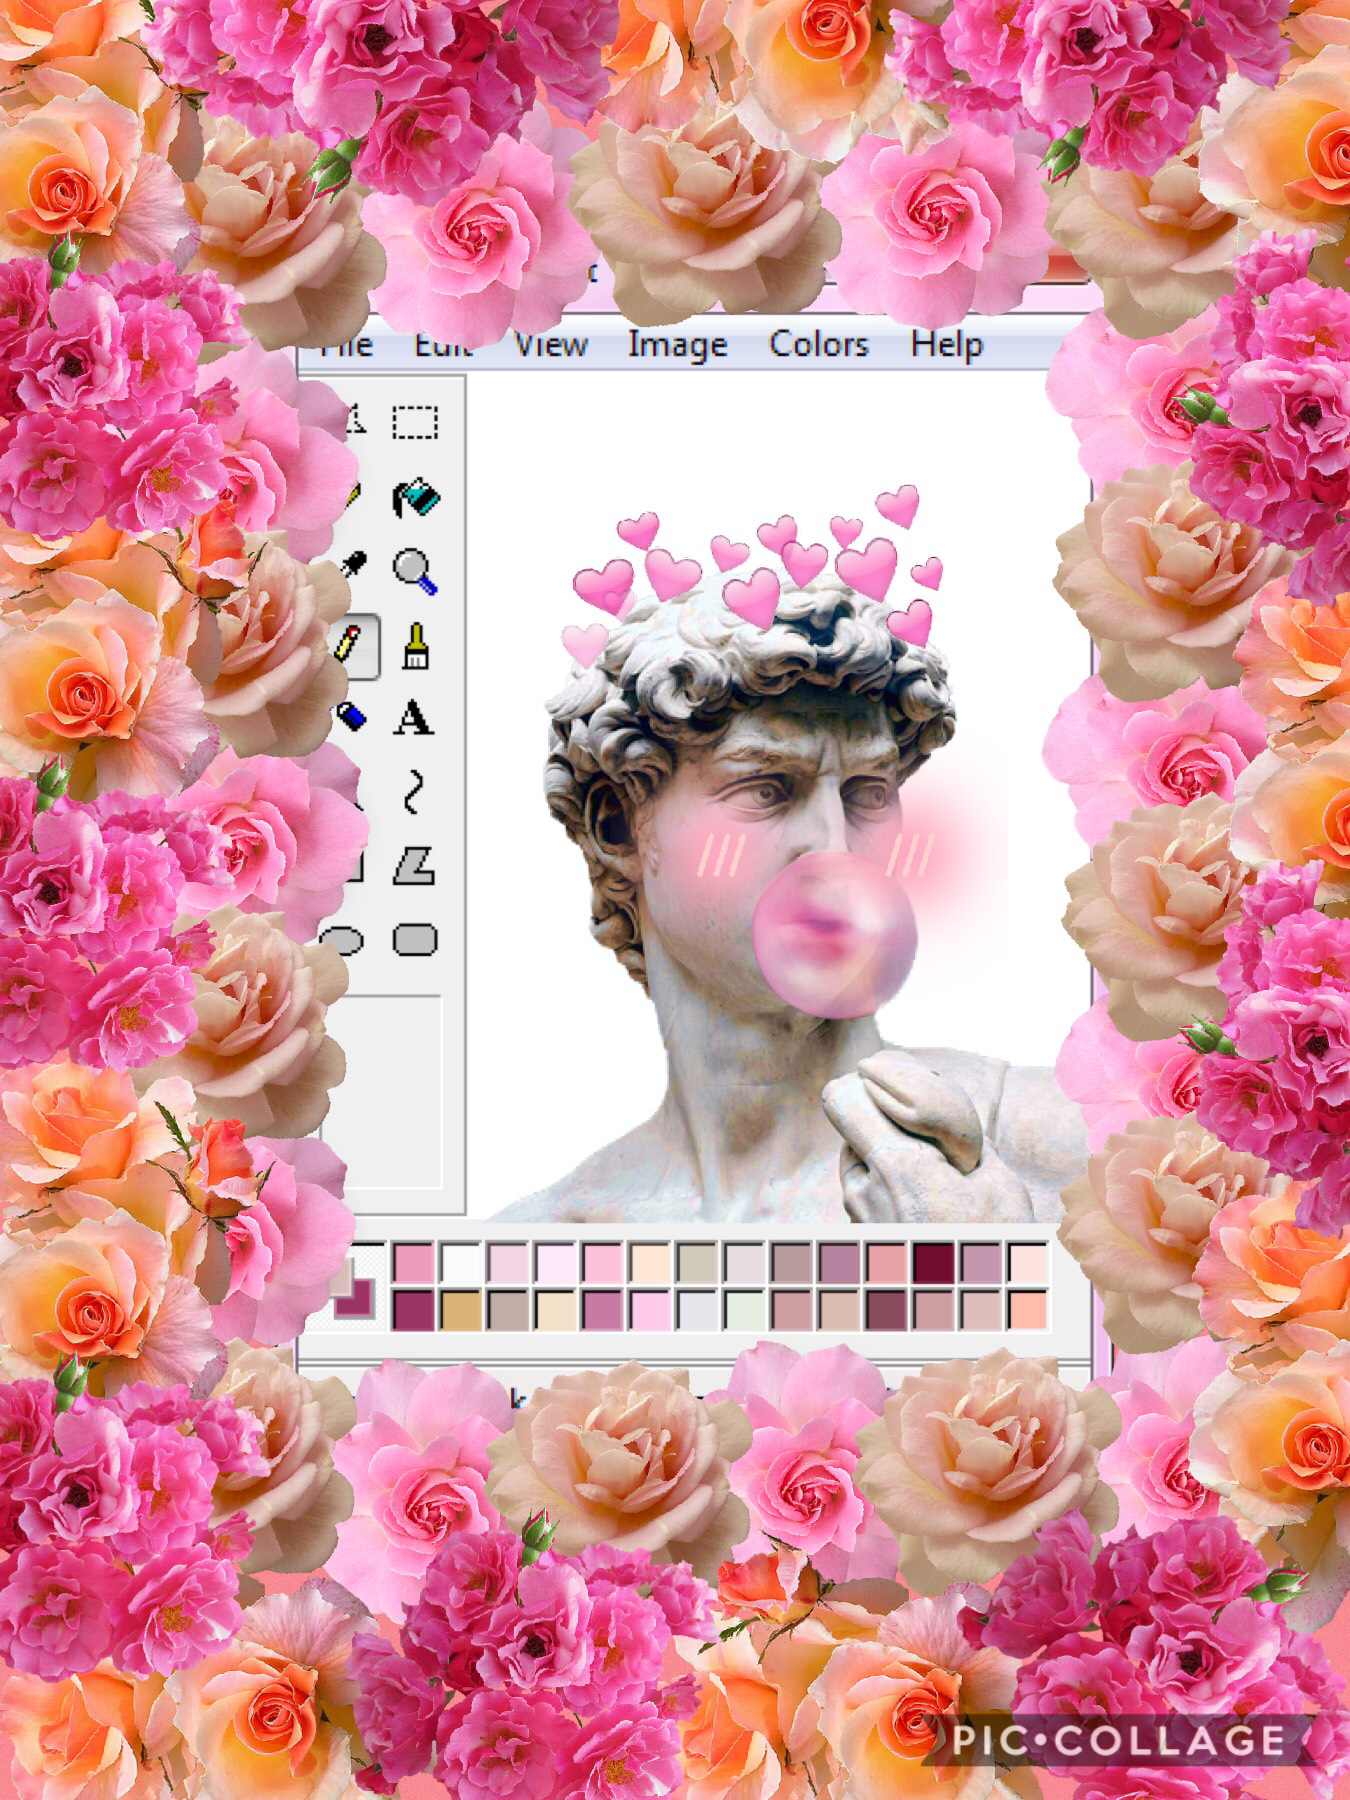 《tap tap pls》
Flowers! Pink Aesthetic! Thx everyone who liked! Love y’all!